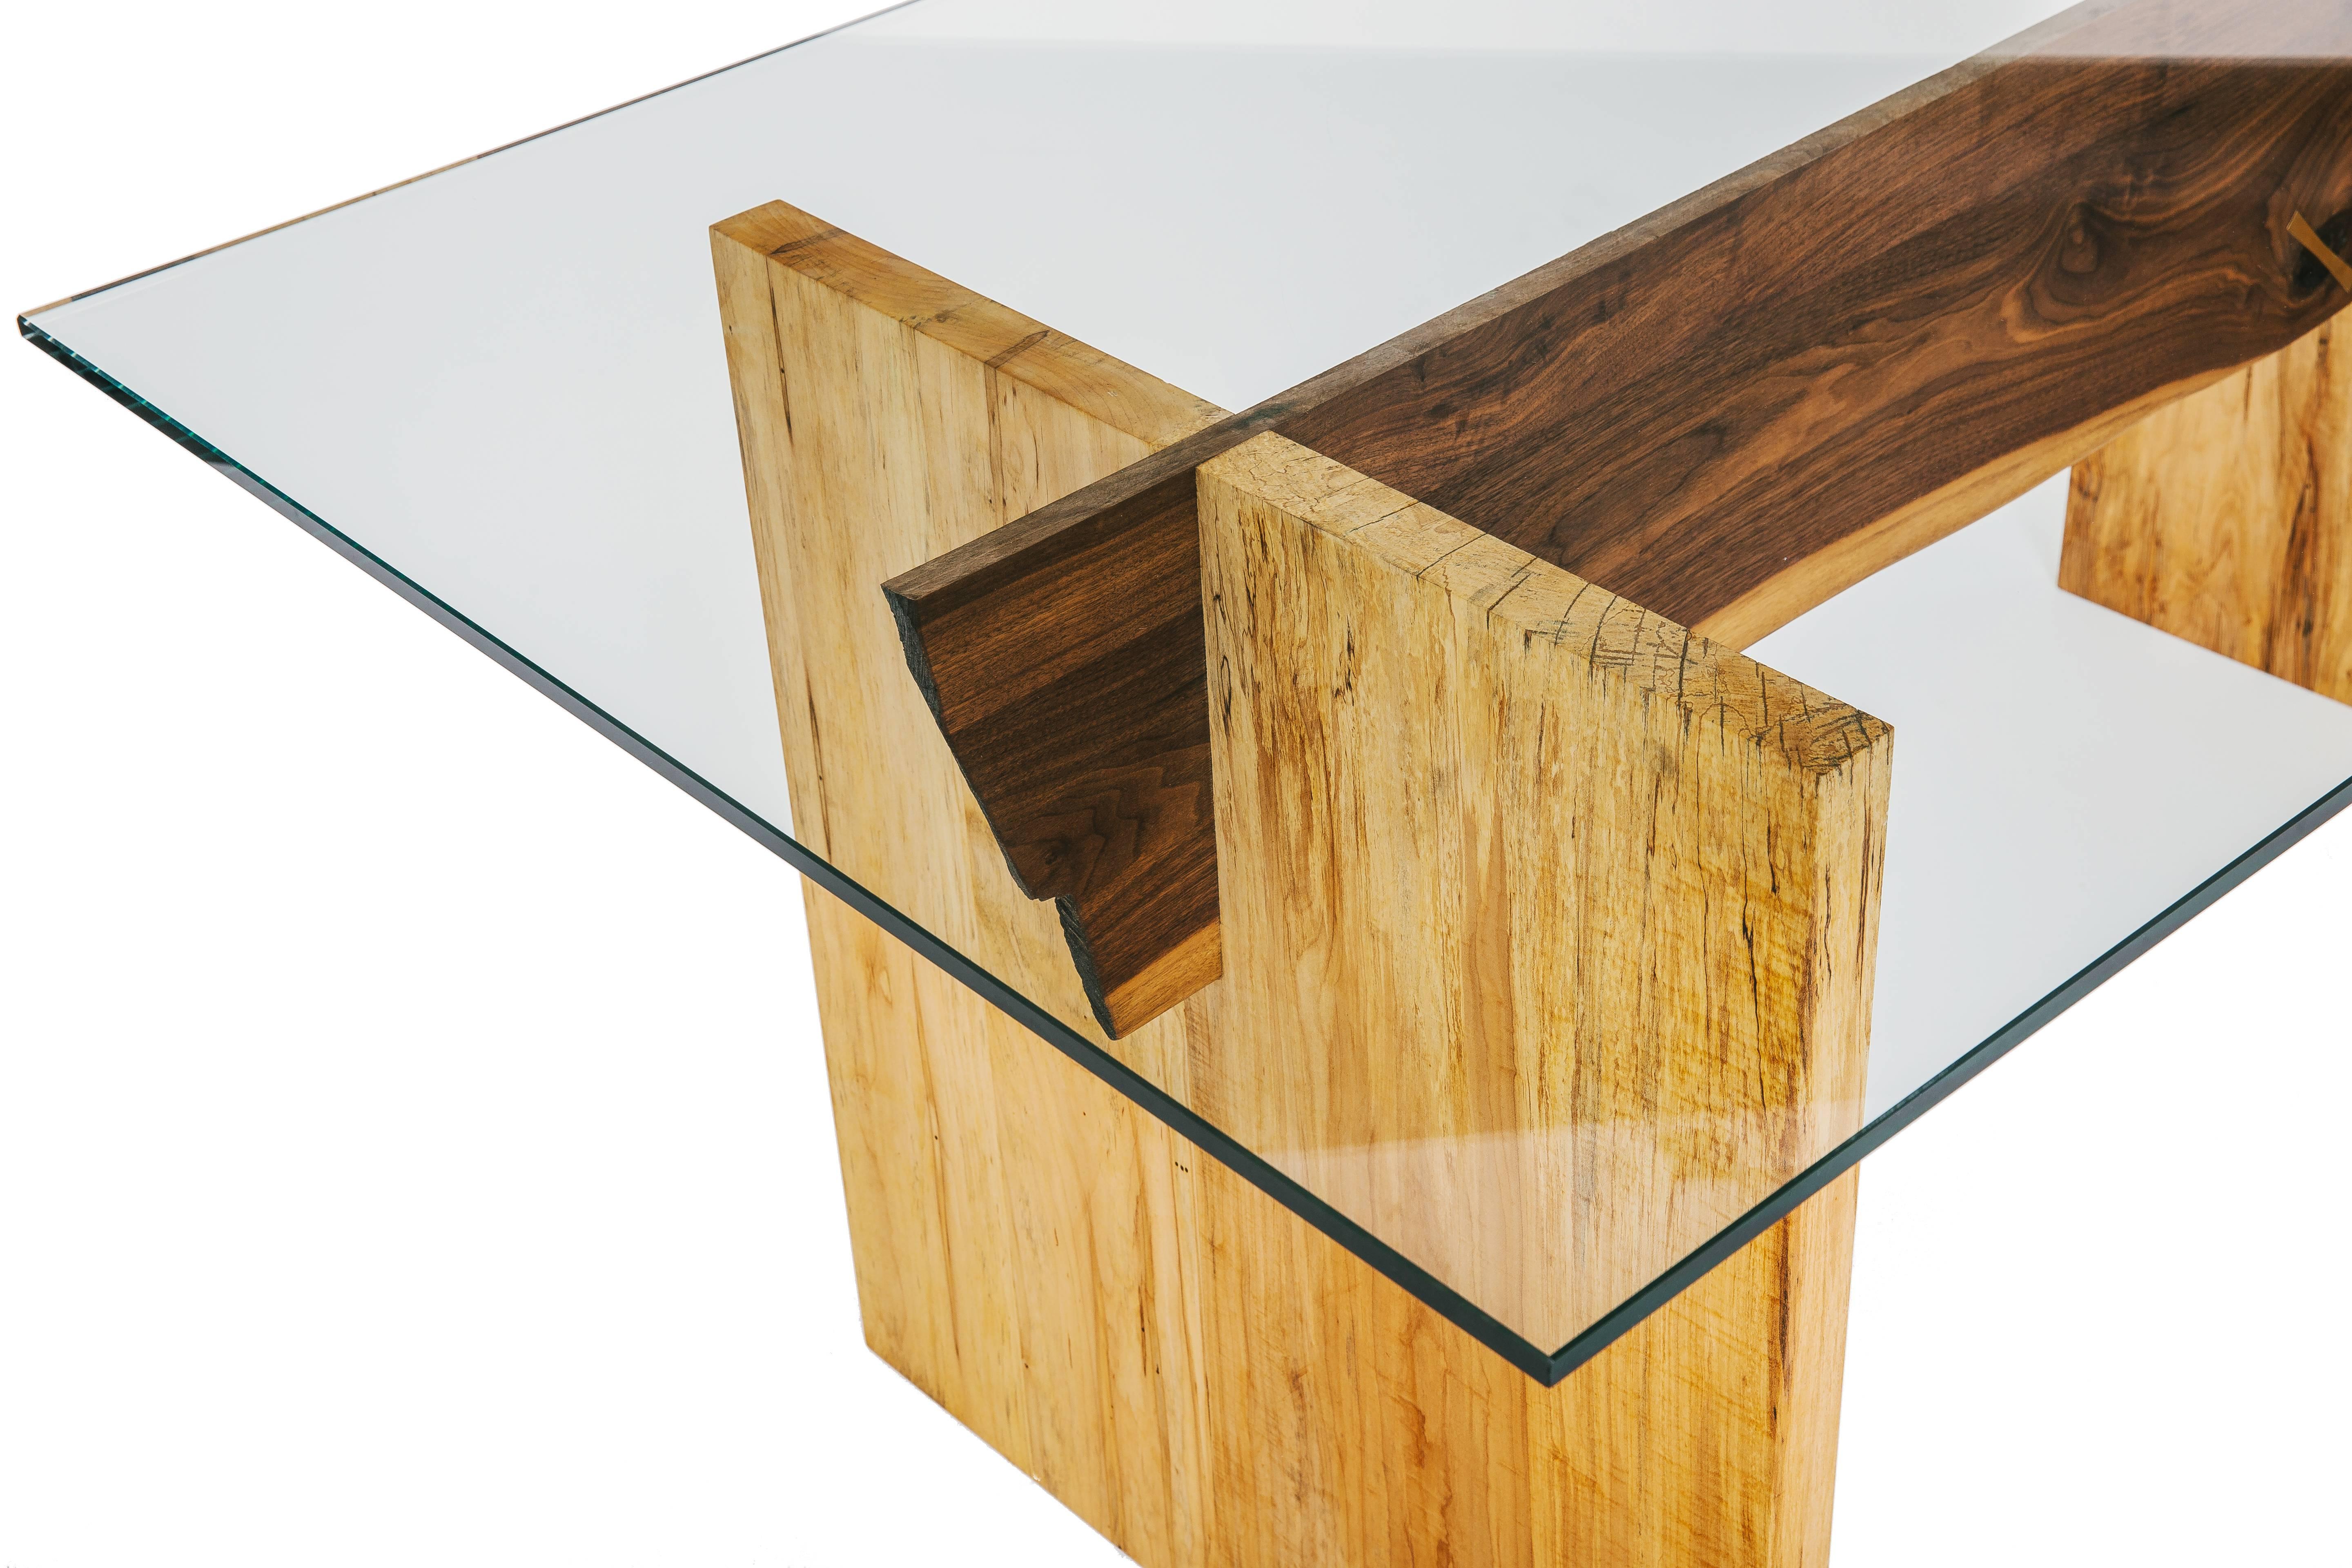 Double slab dining table base with intersecting solid wood stretcher. True brass Dutchman joint. Polished tempered flat polished glass top. Handcrafted in Los Angeles, California.

Wood base is customizable with options of ebonized oak, white oak,